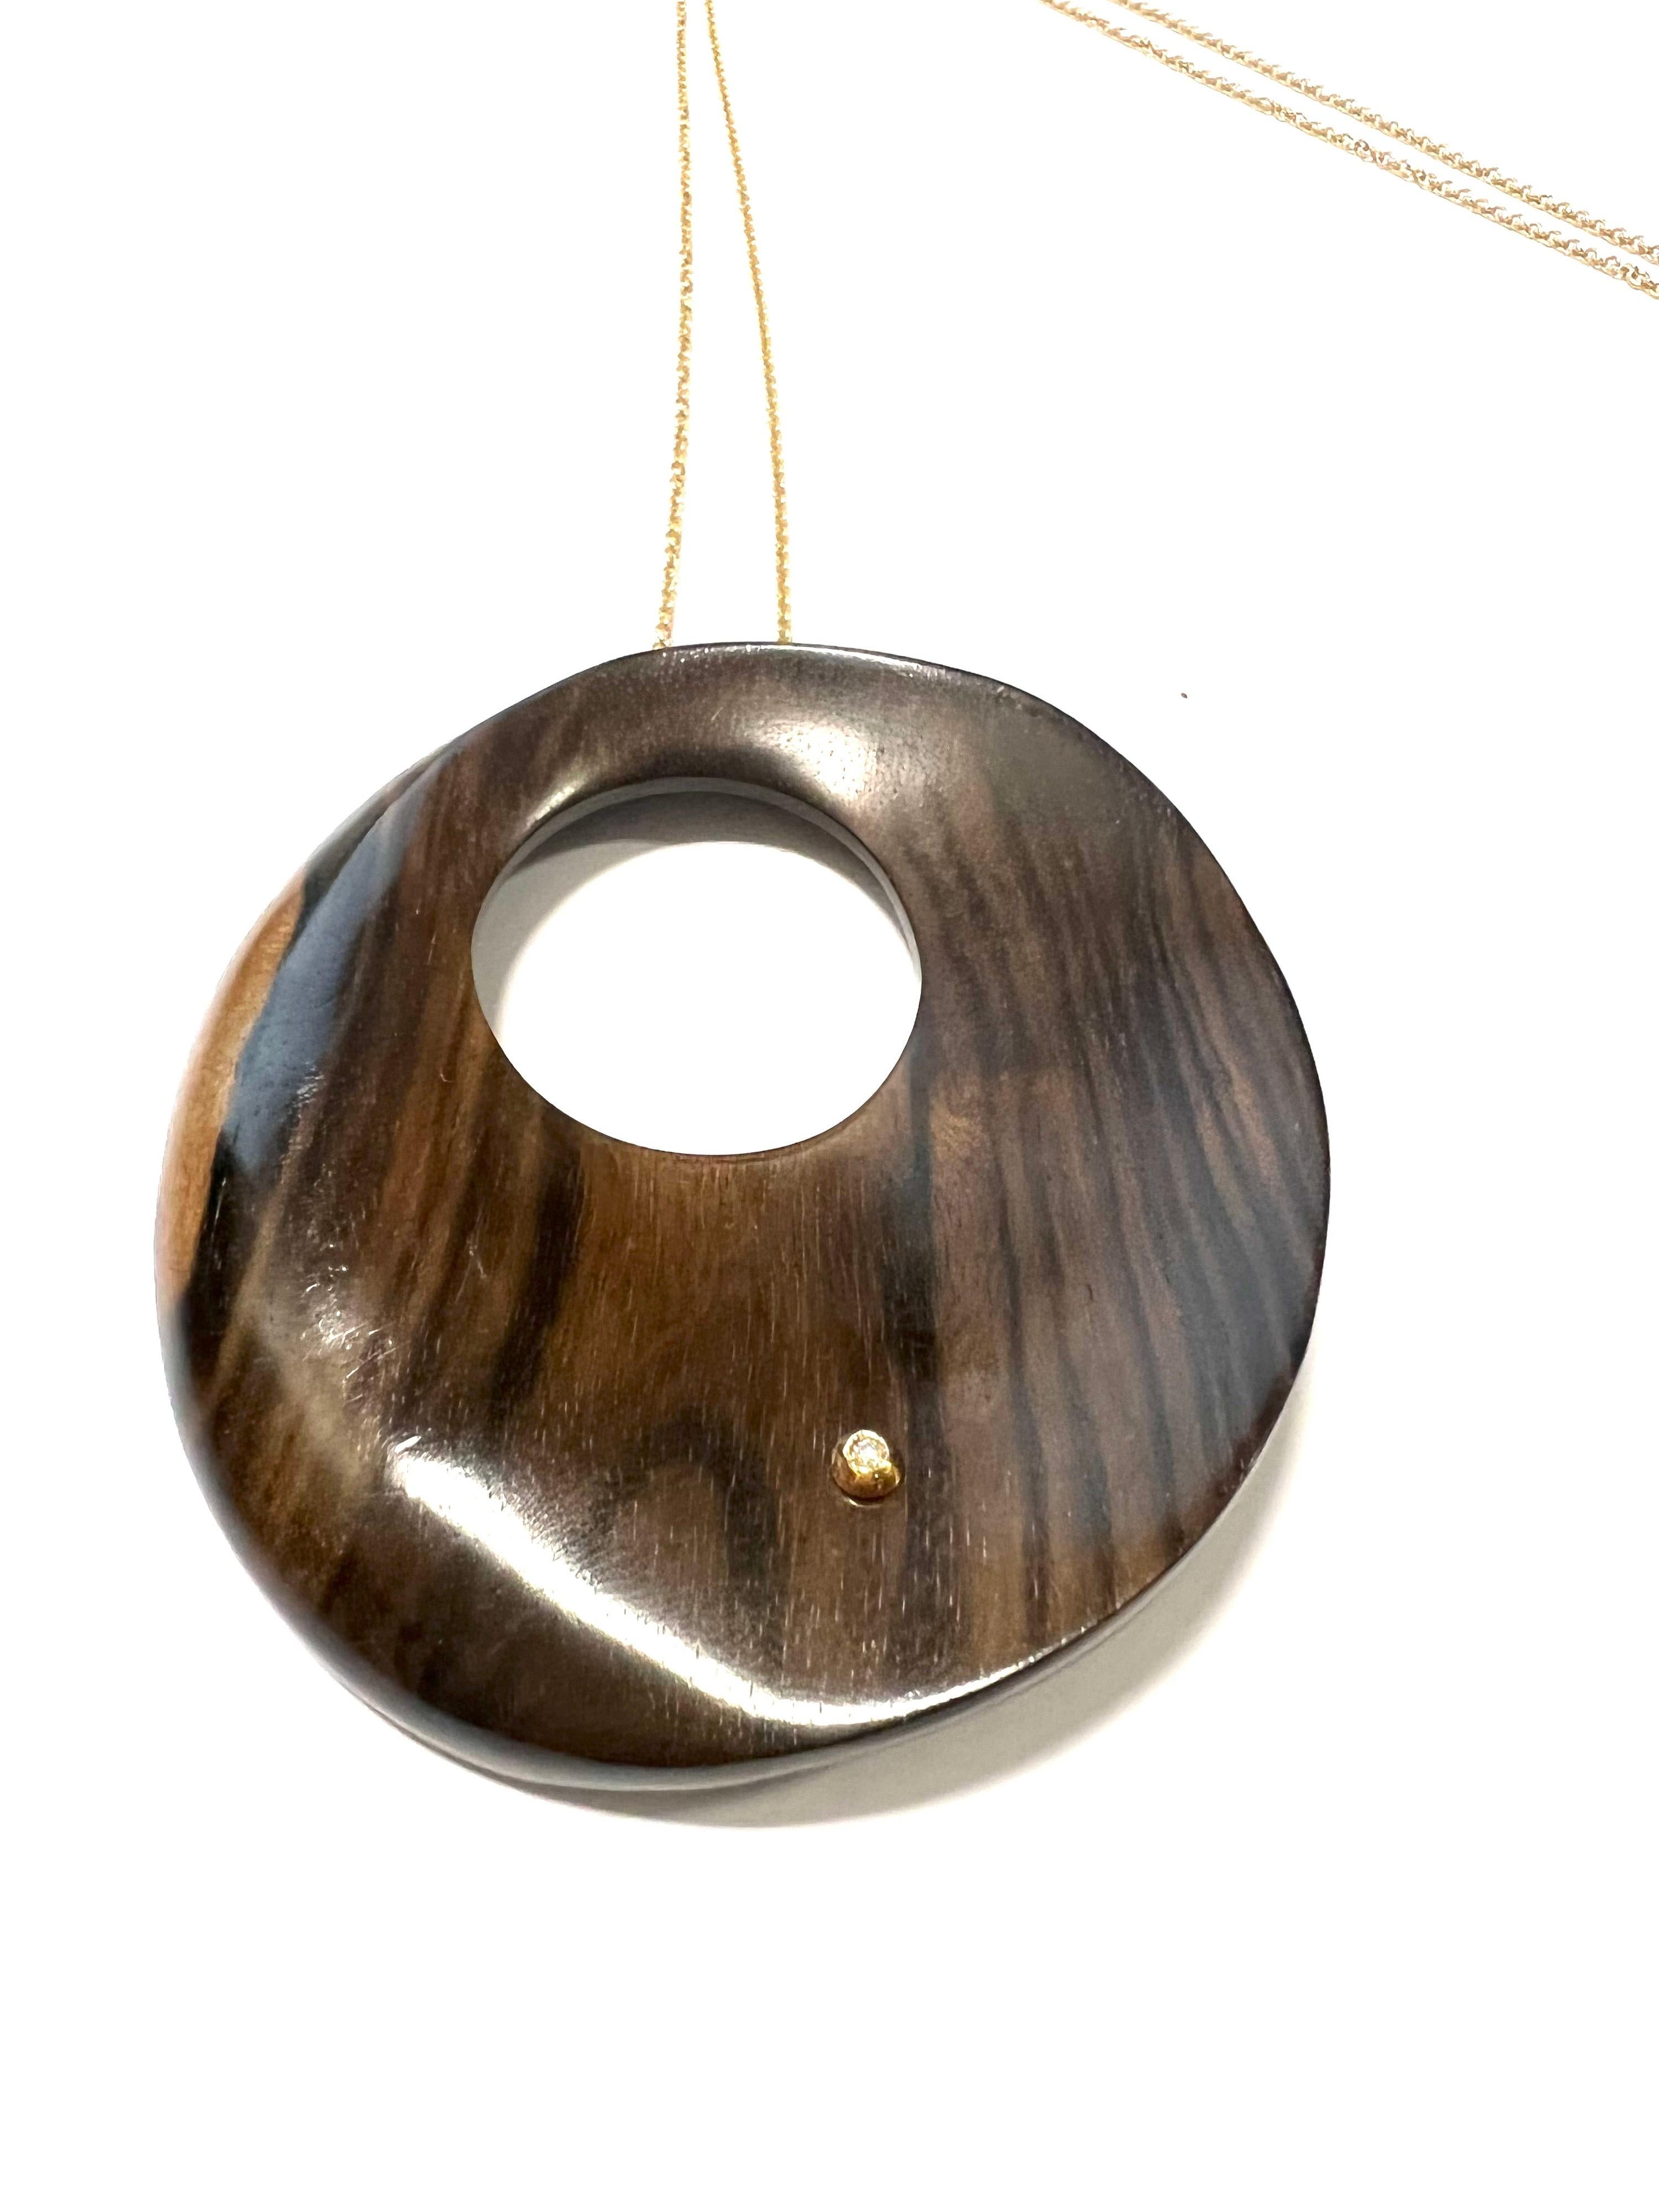 Big Round Rosewood Pendant With Hole And Diamond On 18K Yellow Gold Necklace
Rosewood is an elegant and precious wood and this pendant is embellished by a diamond.

Tot weight gr. 55.3
Gold weight gr. 12.8
1 Diamond GVVS ct.0,09
Chain length